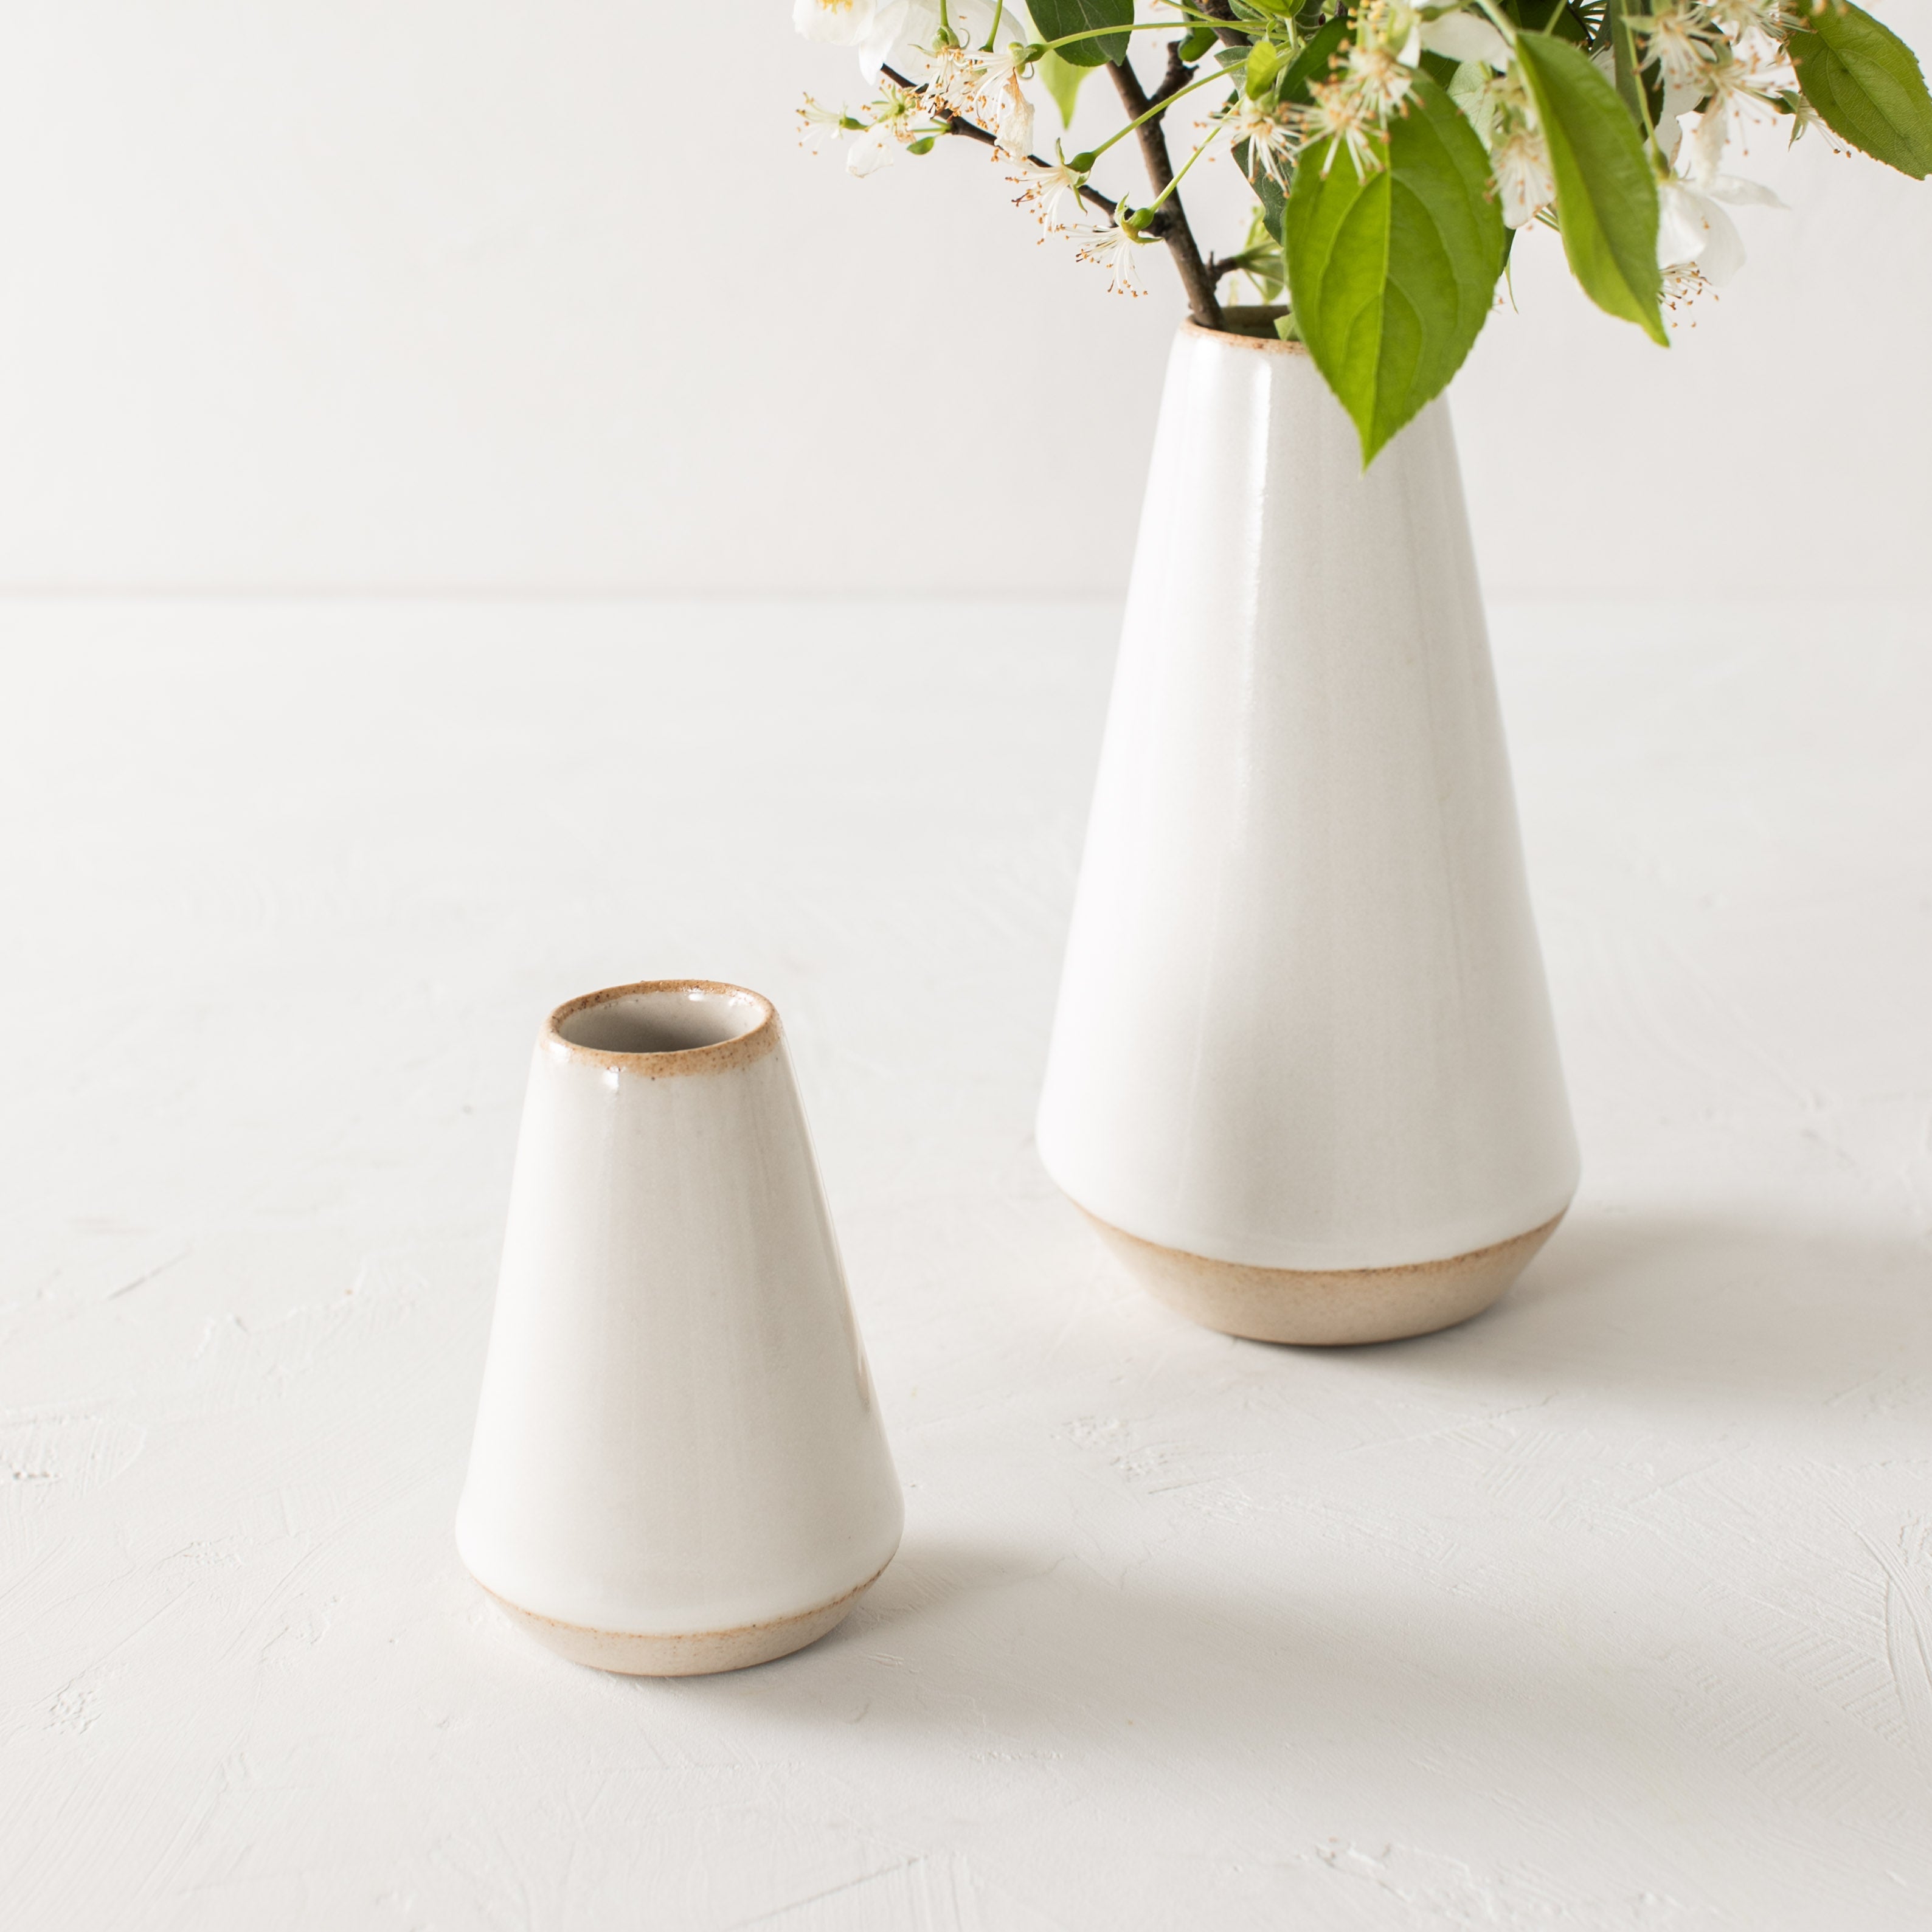 Two minimal white tapered bud vases side by side, seven inch and 4 in. 7 in has a white blossom branch inside. Handmade ceramic bud vase designed and sold by Convivial Production, Kansas City ceramics.